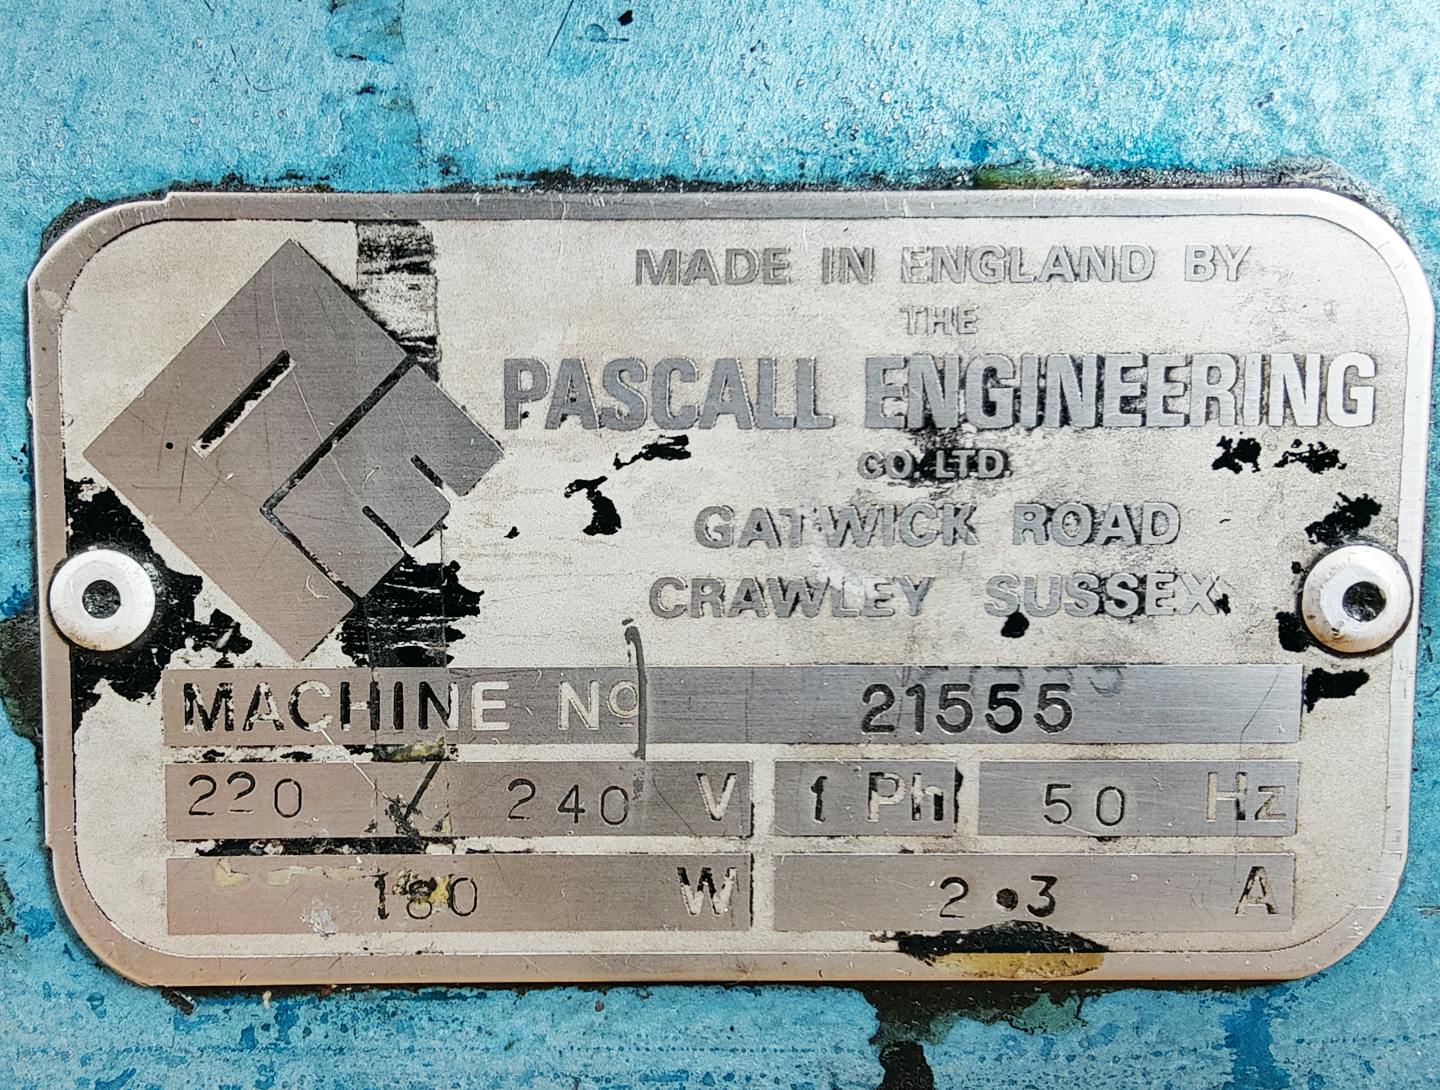 Pascall Engineering Model 1 - Three roll mill - image 8